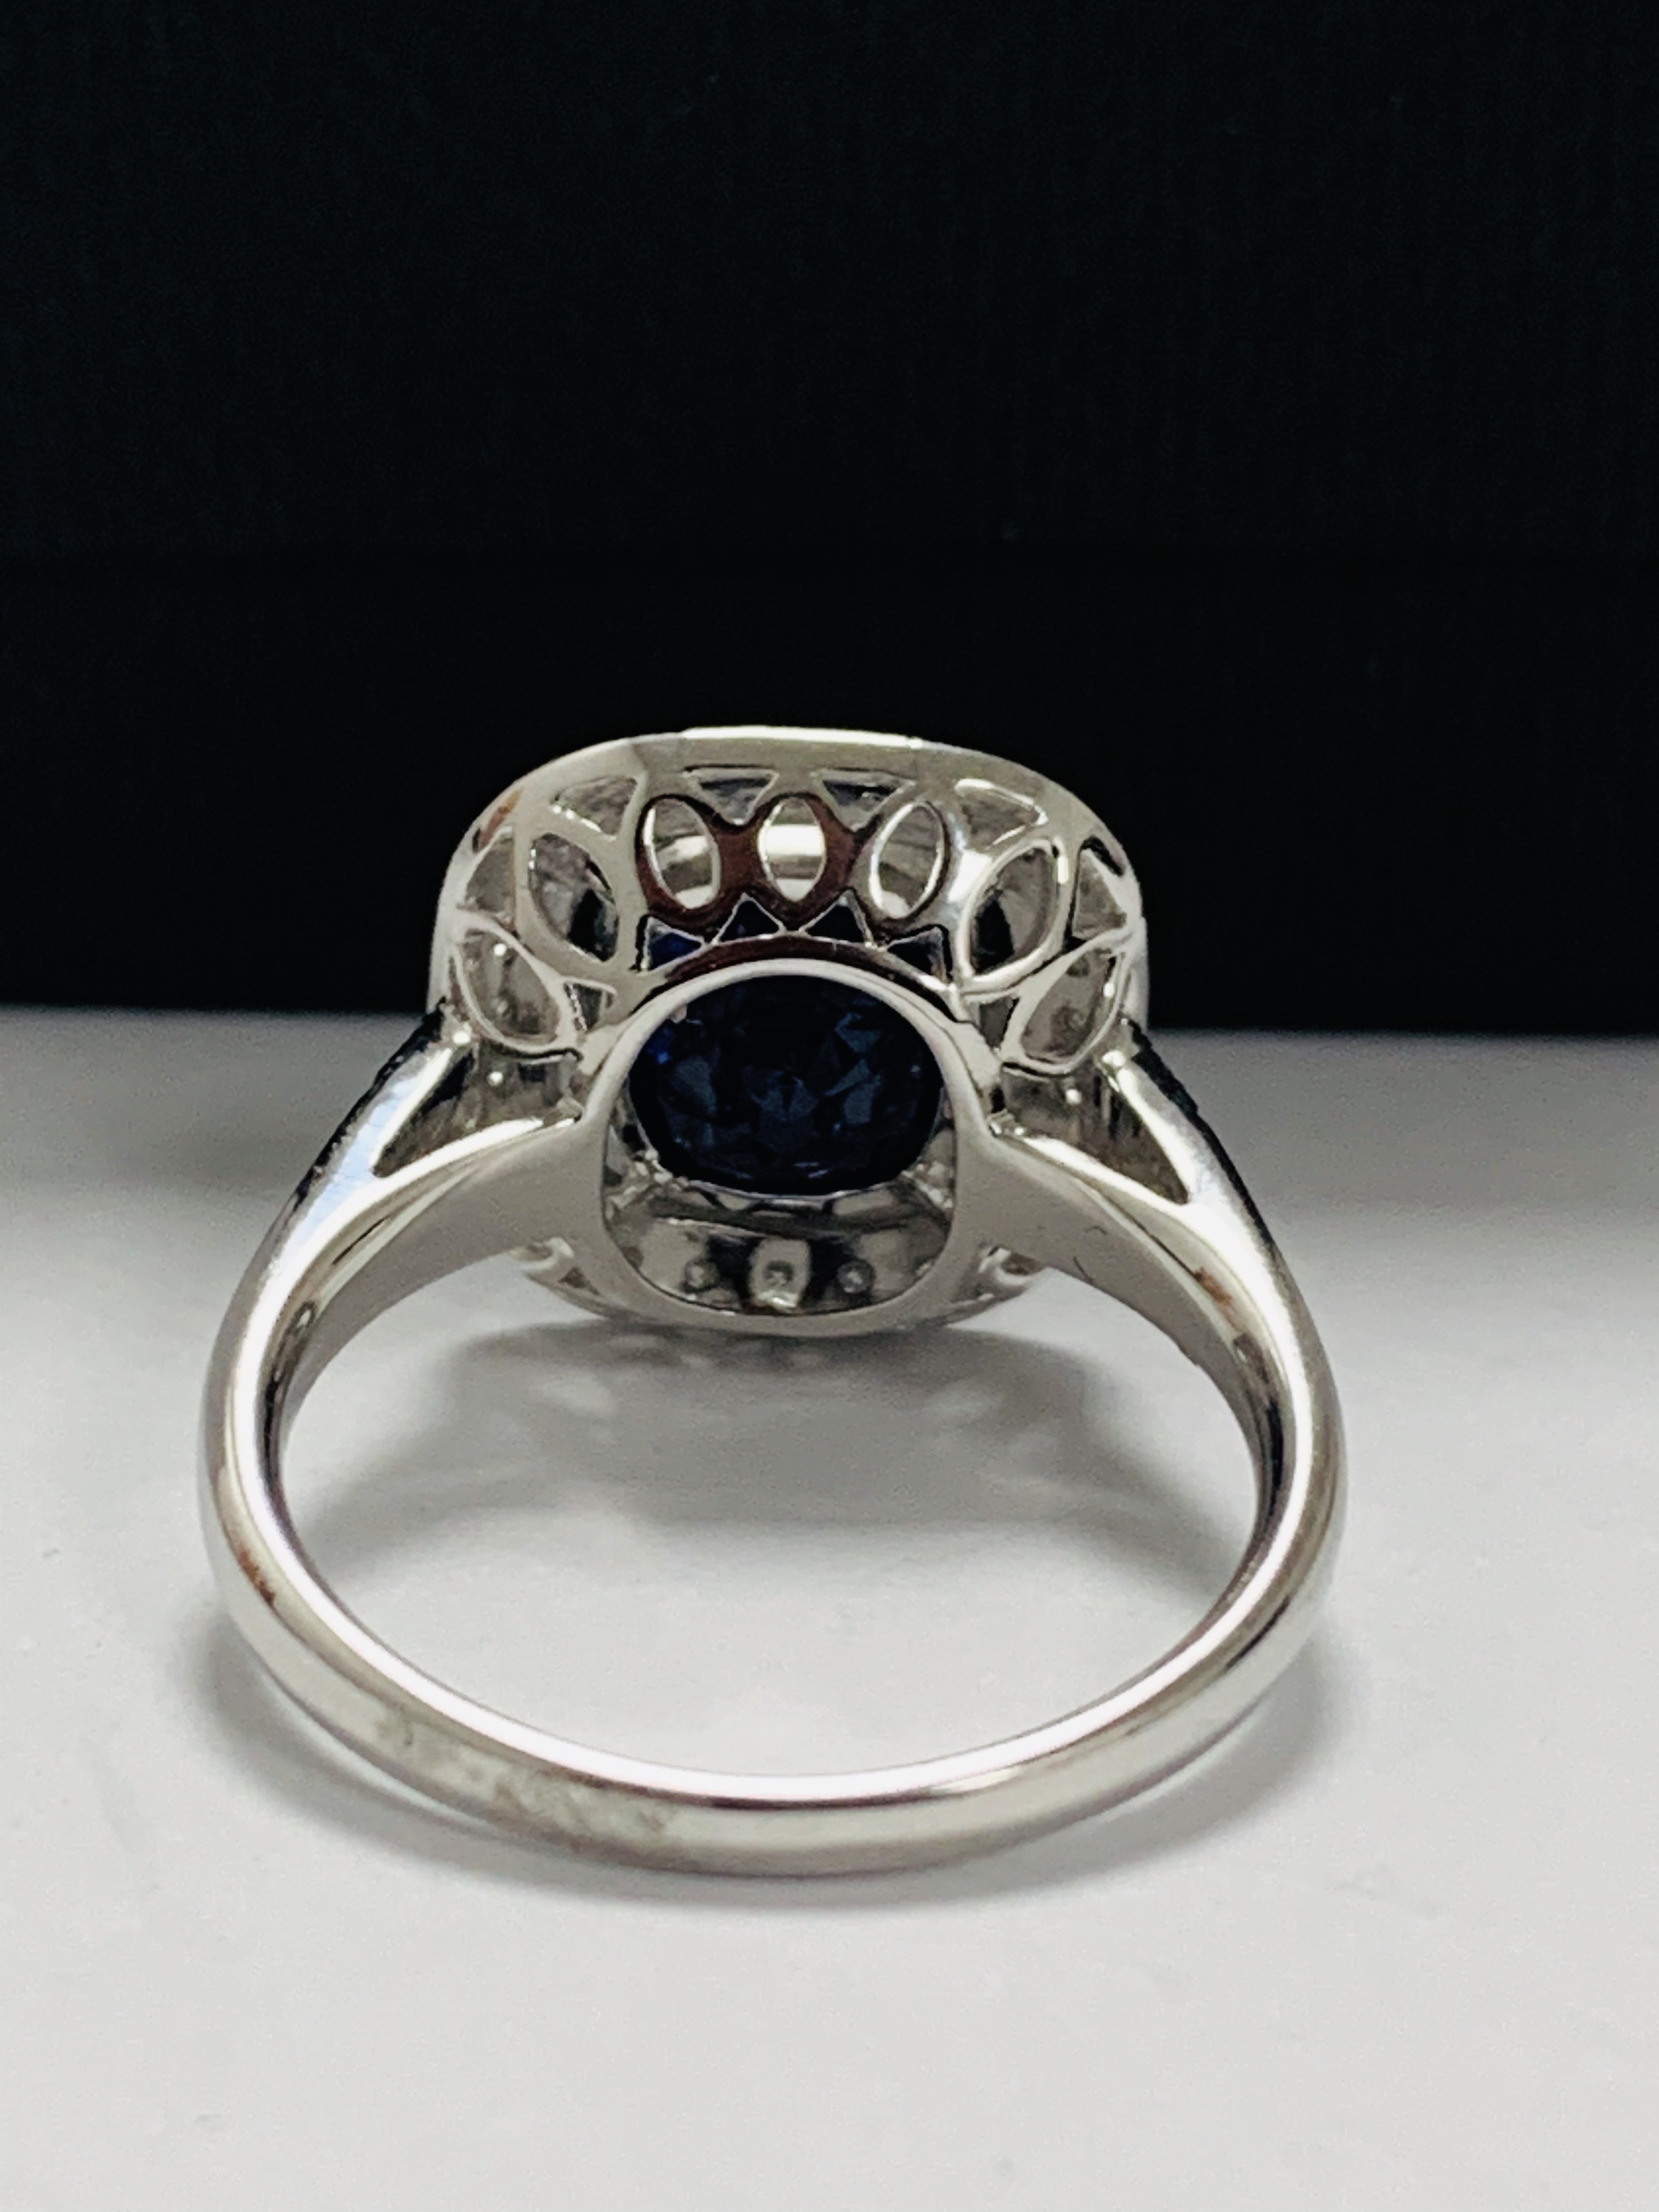 18ct White Gold Sapphire and Diamond ring featuring centre, cushion cut, natural Kashmir Sapphire (2 - Image 5 of 12